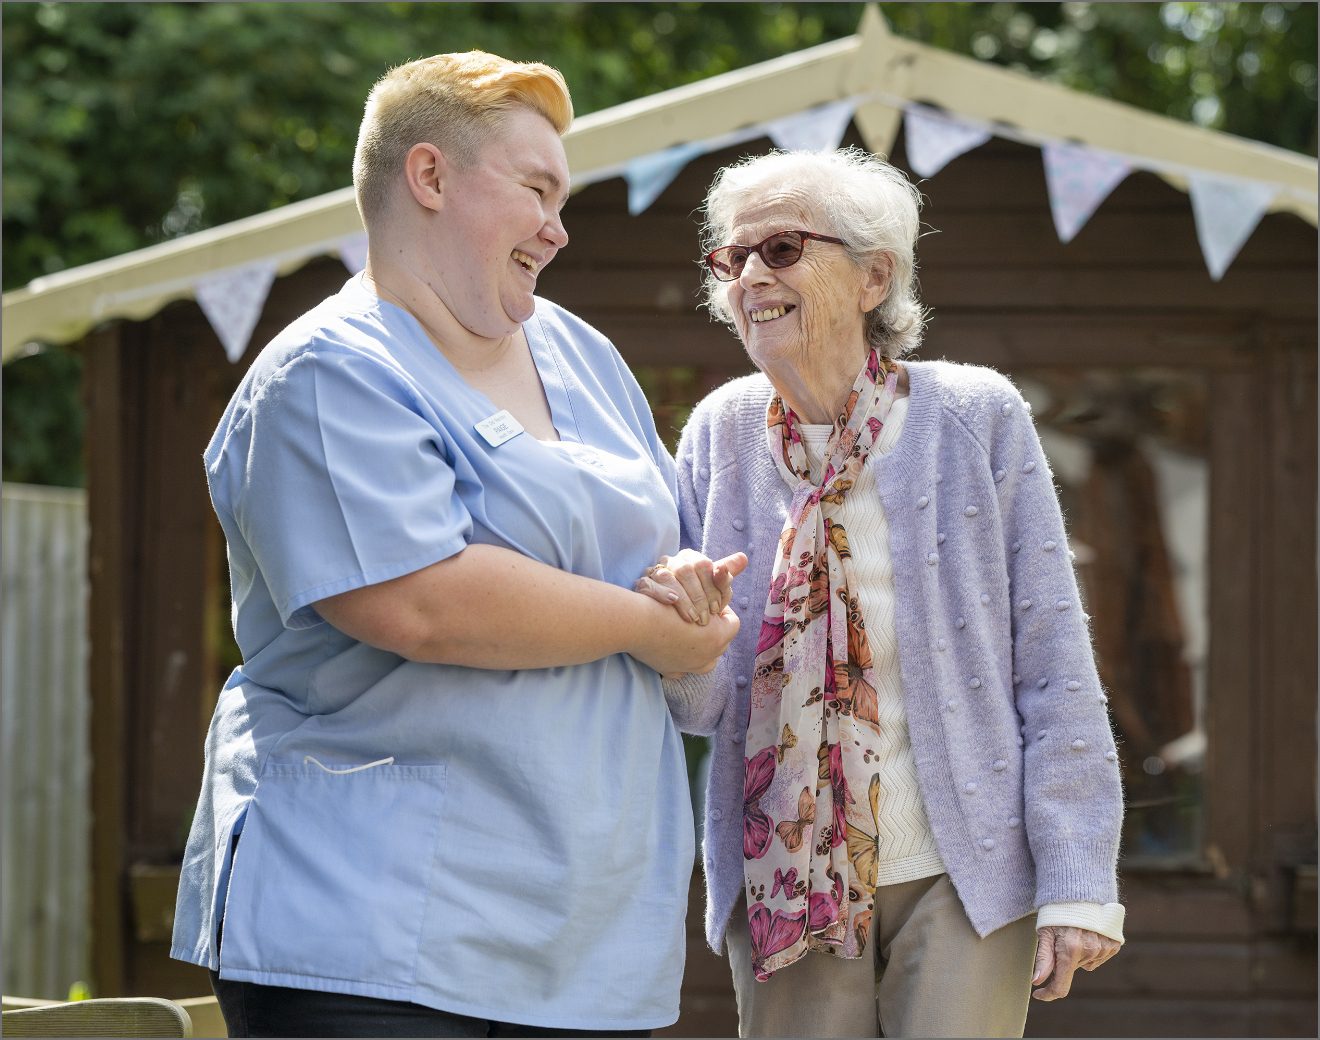 Our care worker chatting to a resident